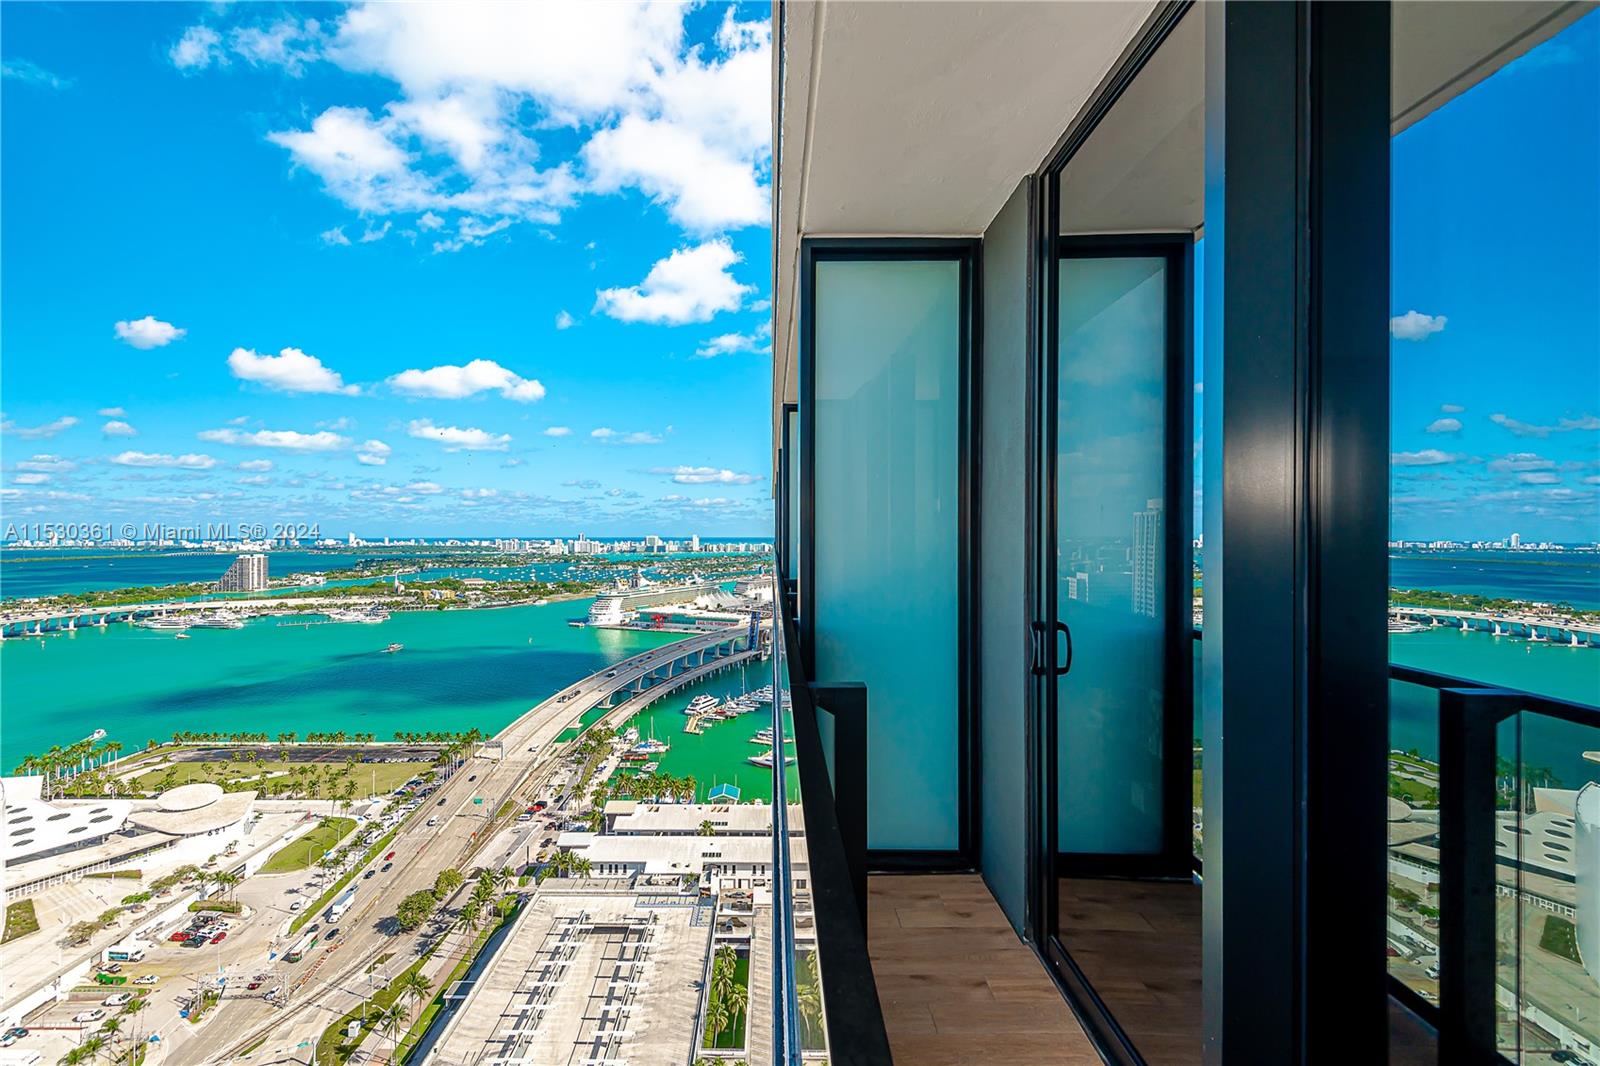 Experience luxury living with breathtaking views of Biscayne Bay and Downtown Miami in this brand new 496 sqft studio. Boasting high income potential and unrestricted rental opportunities, this fully furnished unit features a full kitchen, king-size bed, pull-out couch, washer and dryer, and a large flat-screen TV. Enjoy amenities such as a wraparound pool, two-story gym, valet parking, and more. Conveniently located near Kaseya Center, Bayside Marketplace, major roadways, the Port of Miami, Brightline train station, and public parks, this condo offers unparalleled convenience and comfort.